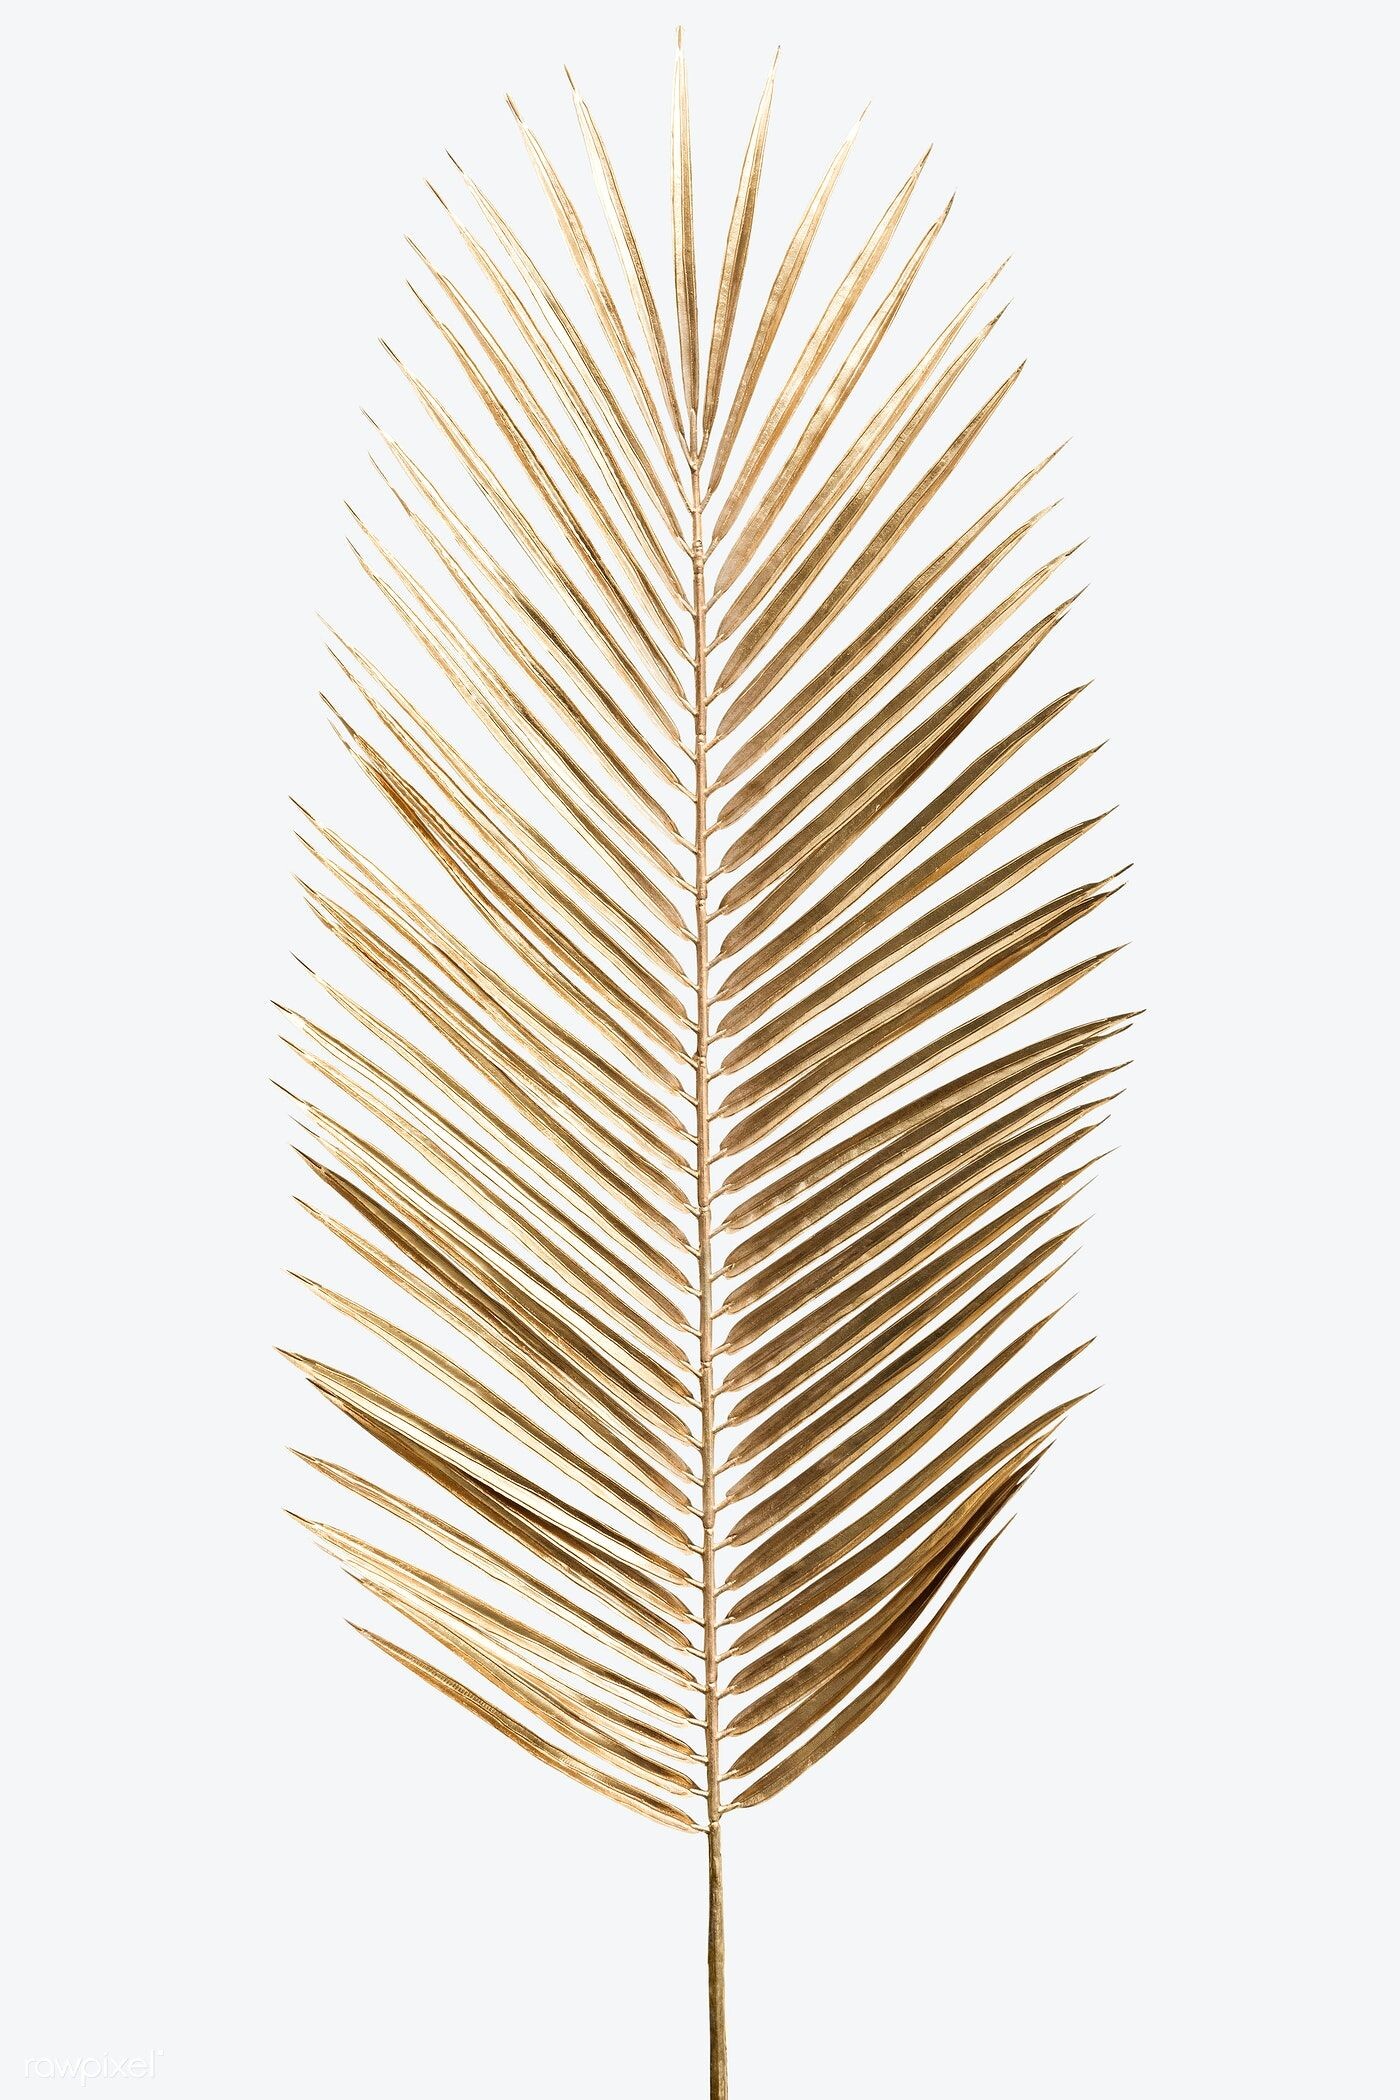 Gold Leaf: Golden palm branch, Beautiful tropical foliage, Feather-like leaves. 1400x2100 HD Background.